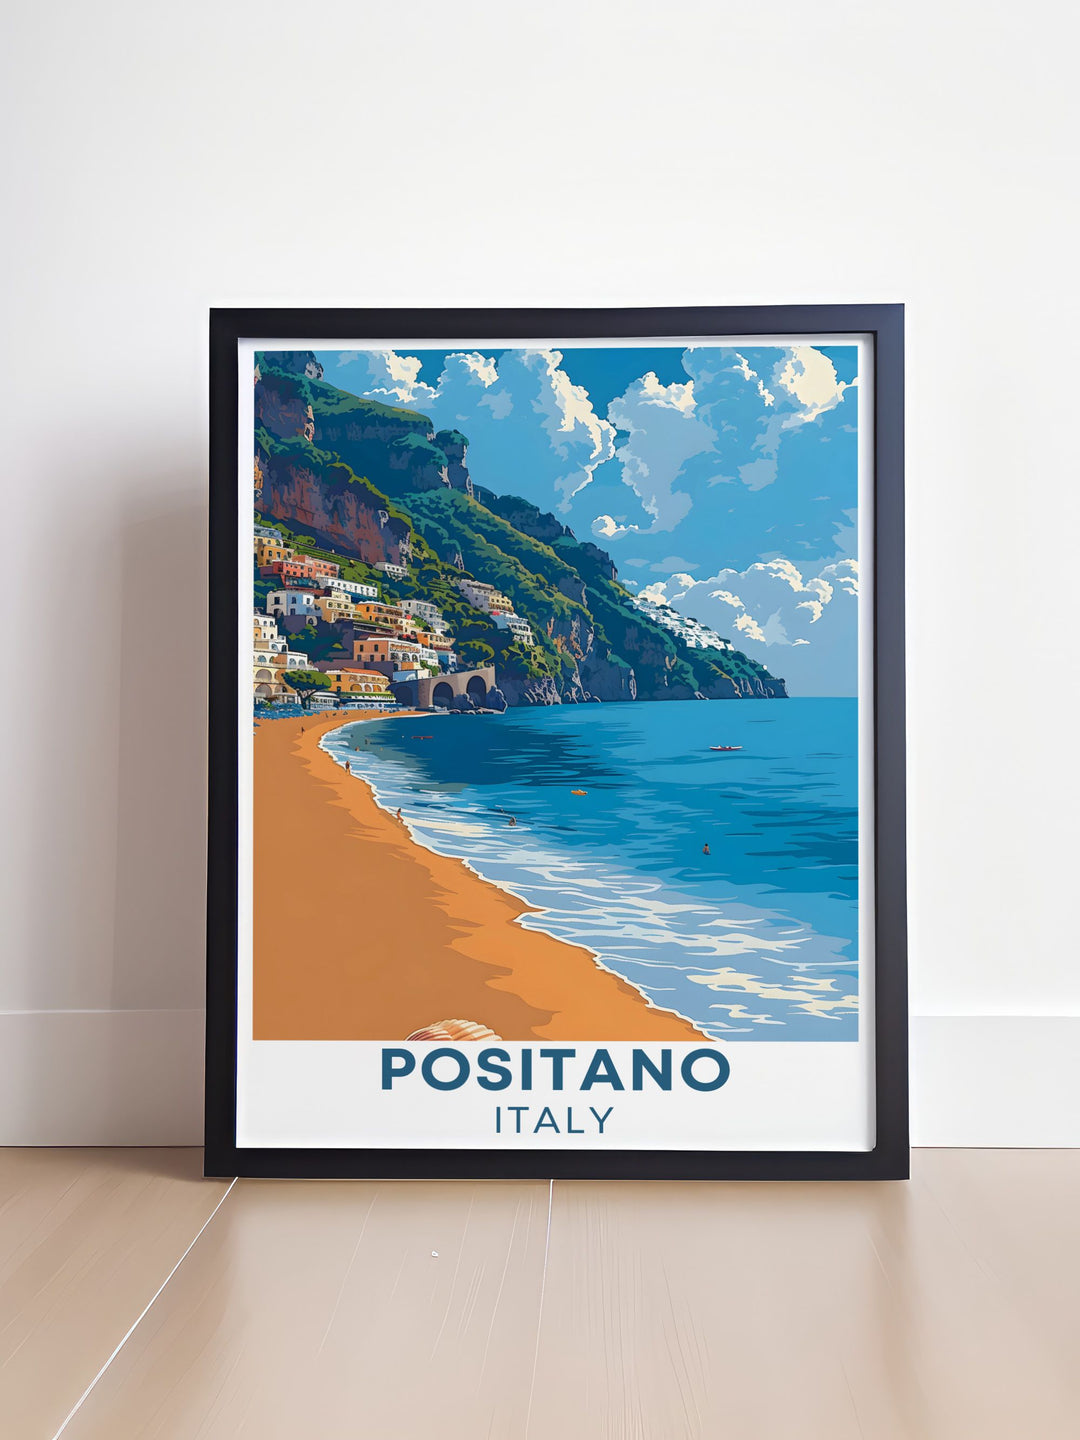 Elegant Positano Print featuring Spiaggia Grande a stunning representation of the Amalfi Coast perfect for wall decor adding vibrant colors and Italian elegance to any room ideal for travel lovers and those who appreciate beautiful coastal art